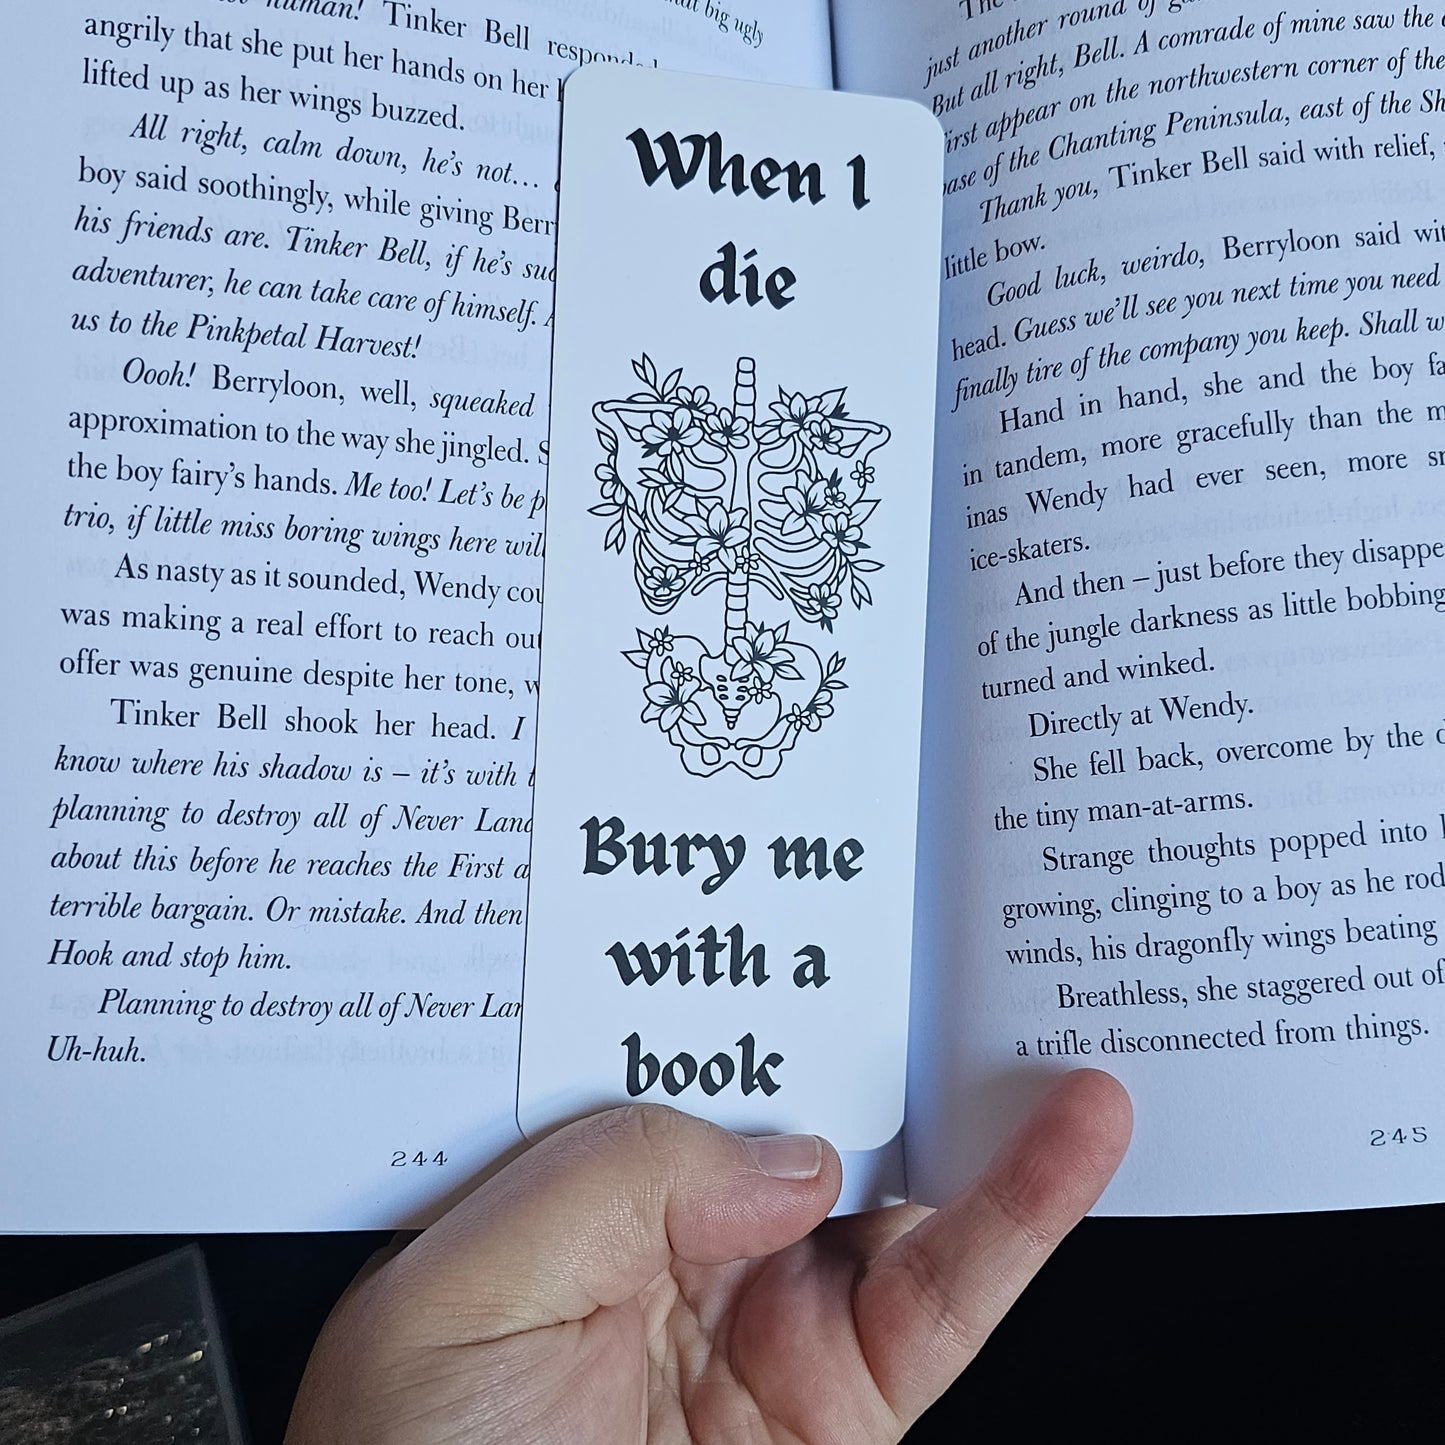 Bury Me with a Book - Bookmark for Dark Literature